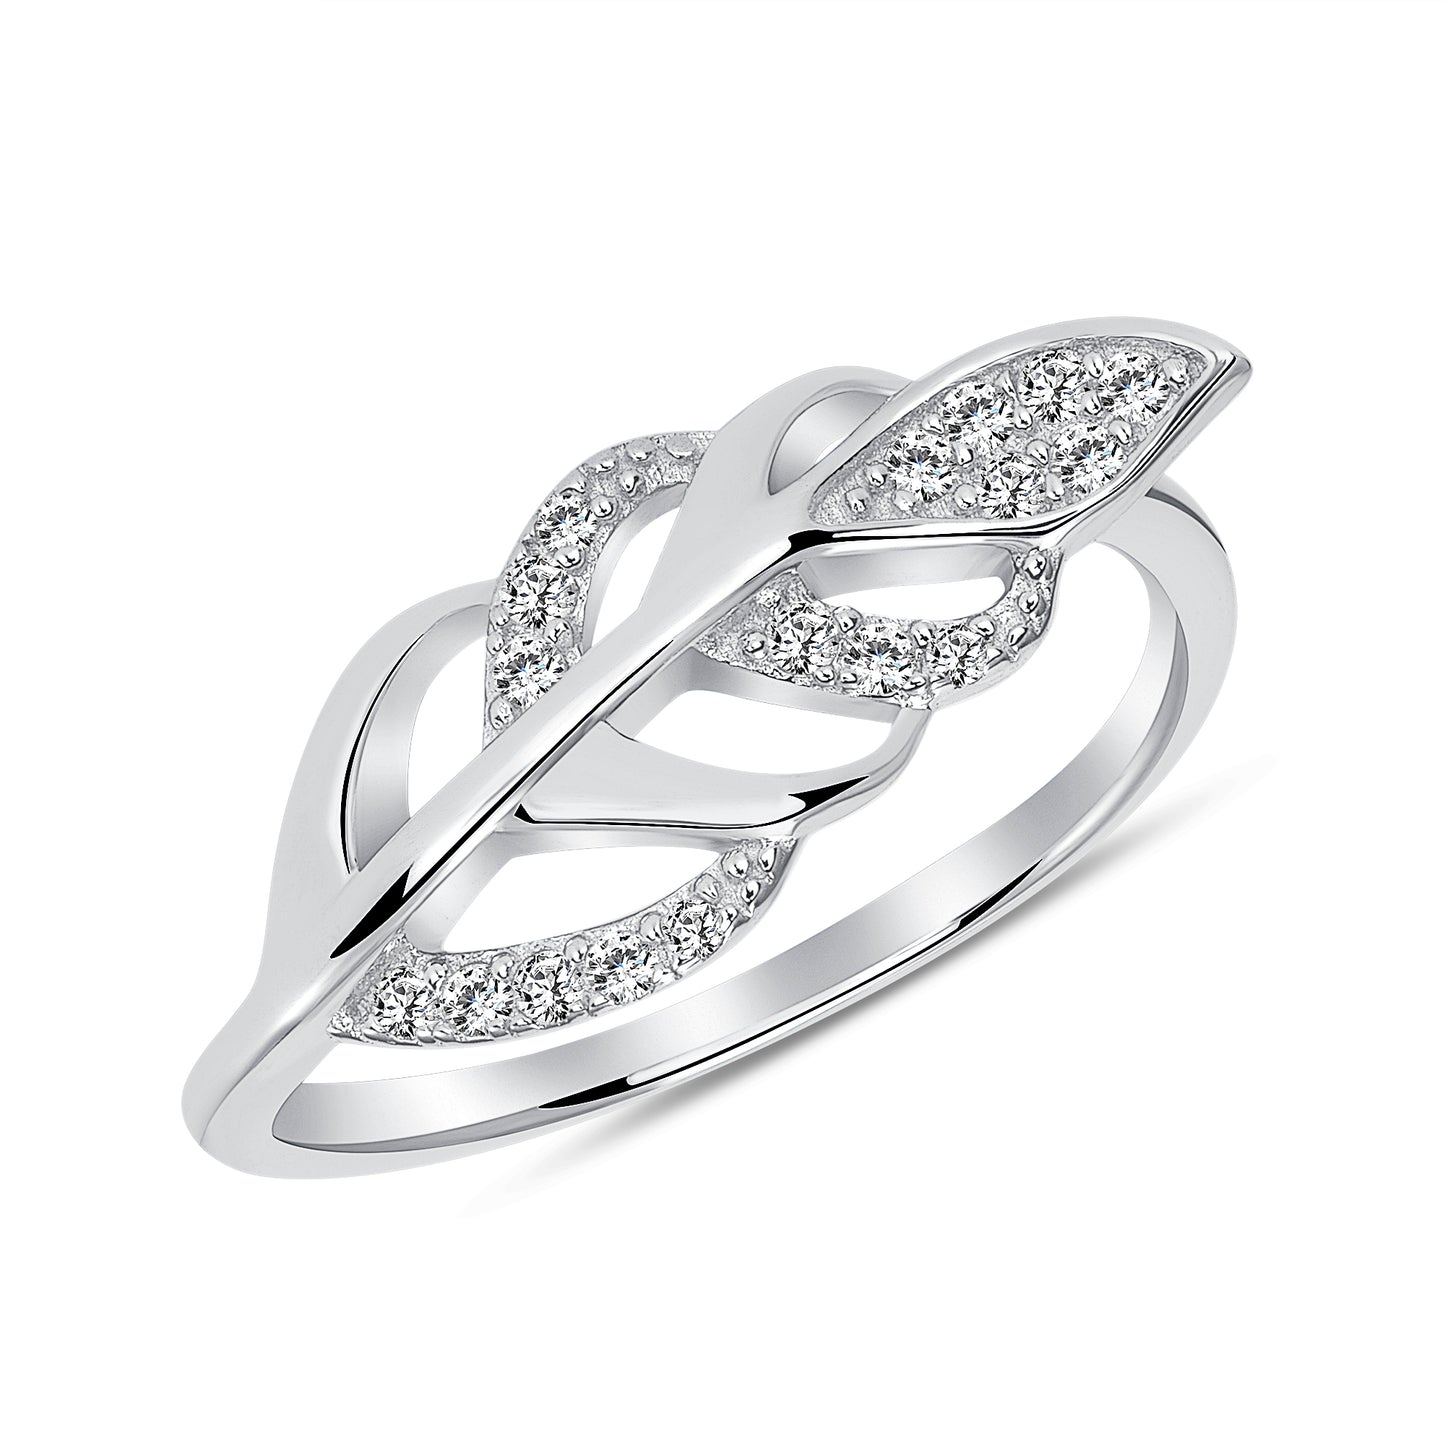 DGR1657. Silver 925 Rhodium Plated Cubic Zirconia Floating Leaf Ring